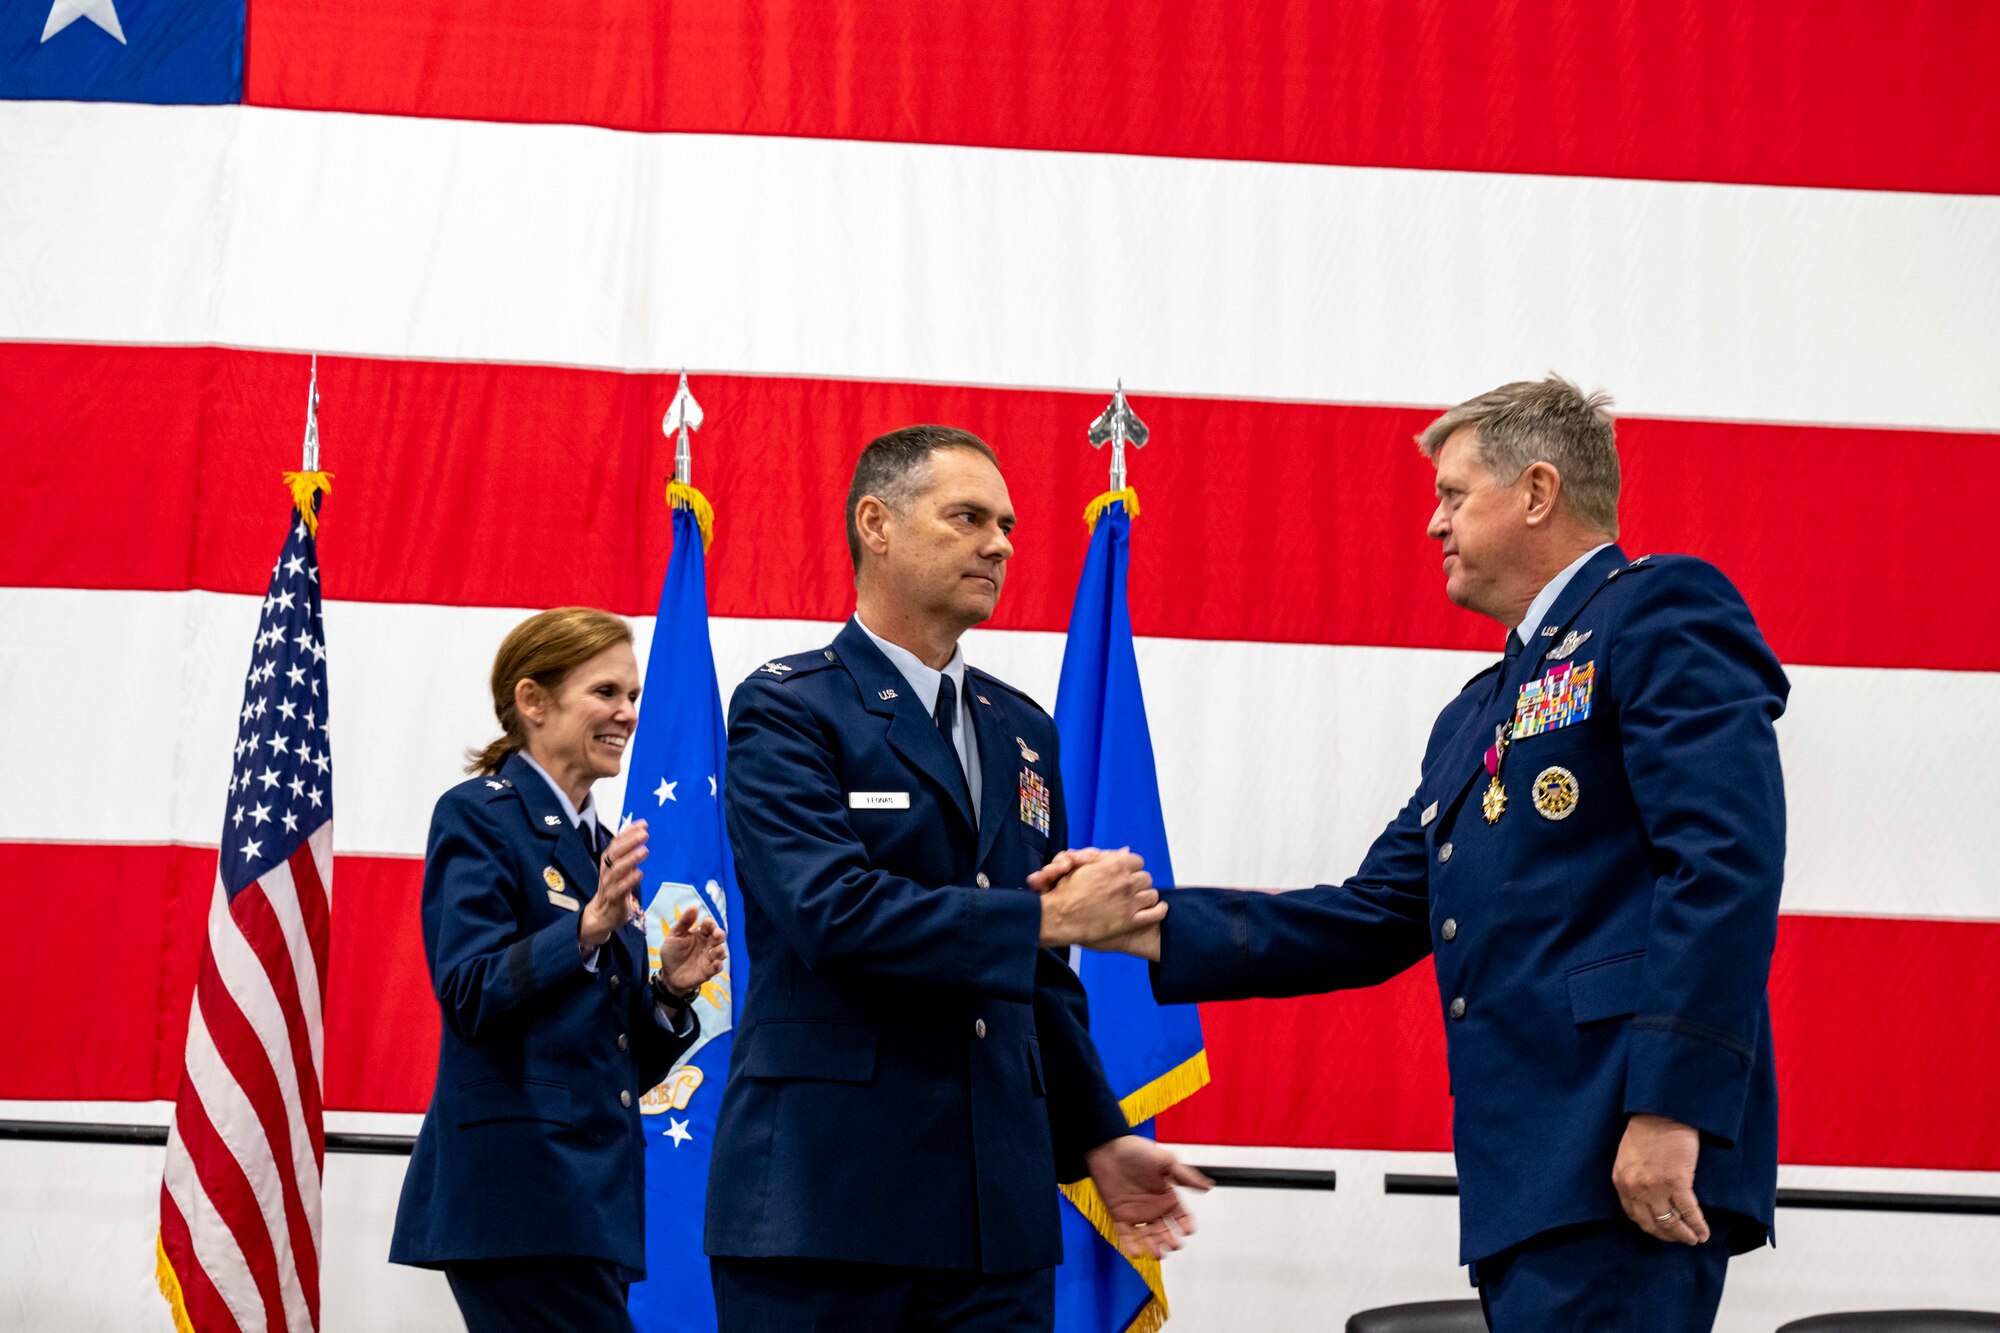 Two men in U.S. Air Force service dress shake hands in the foreground while a similarly-attired woman smiles behind them all in front of a very large American flag.